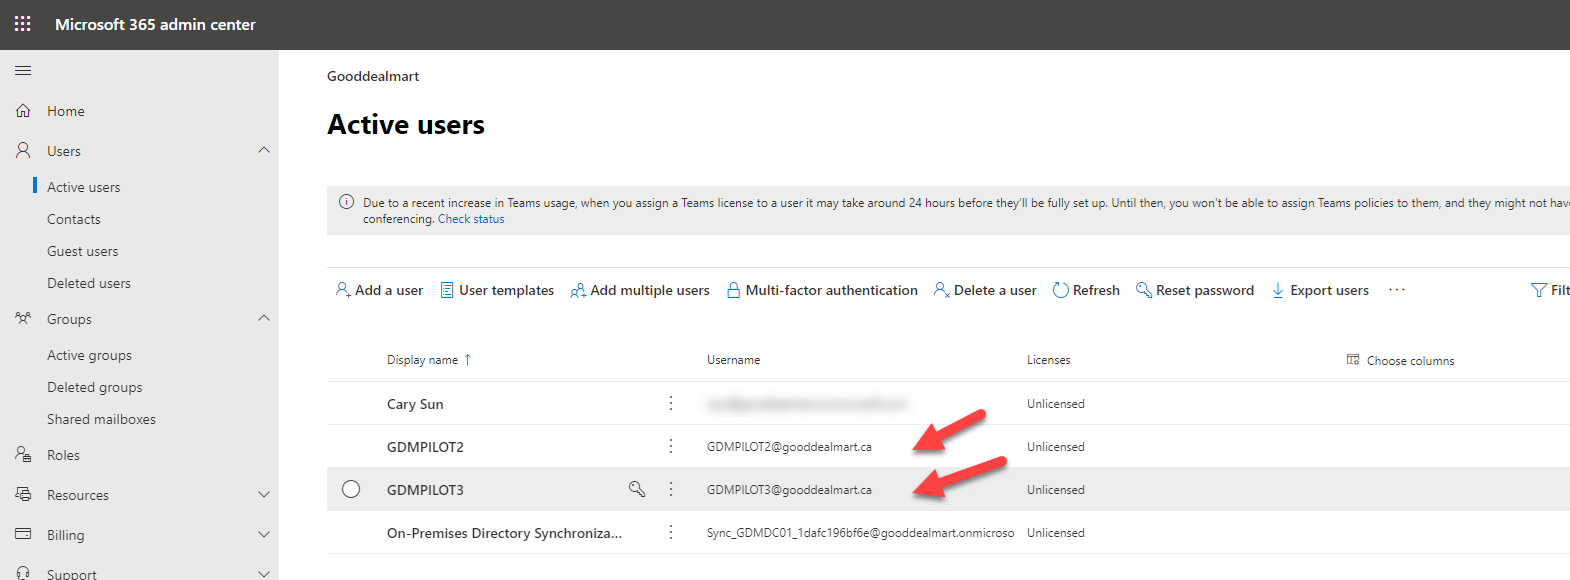 102020 1925 Howtoremove2 - How to remove Users (Objects) that were synchronized through the Azure active directory connect tool